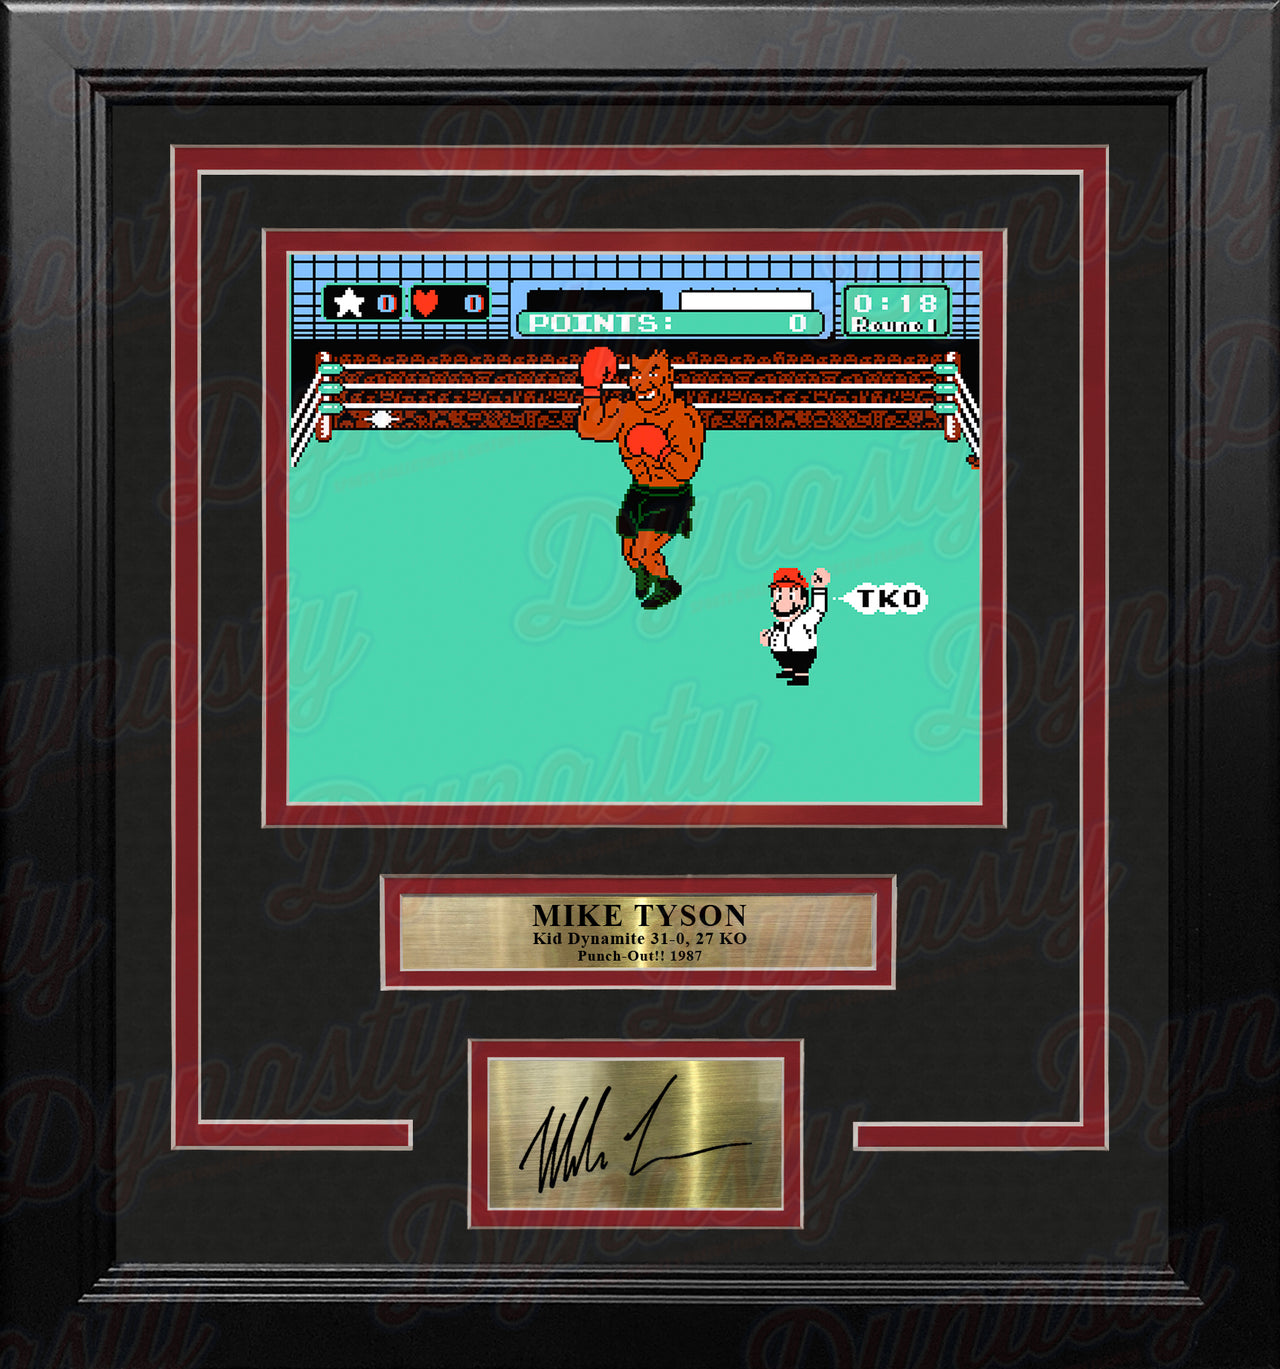 Mike Tyson Punch-Out!! 8" x 10" Framed Video Game Boxing Photo with Engraved Autograph - Dynasty Sports & Framing 